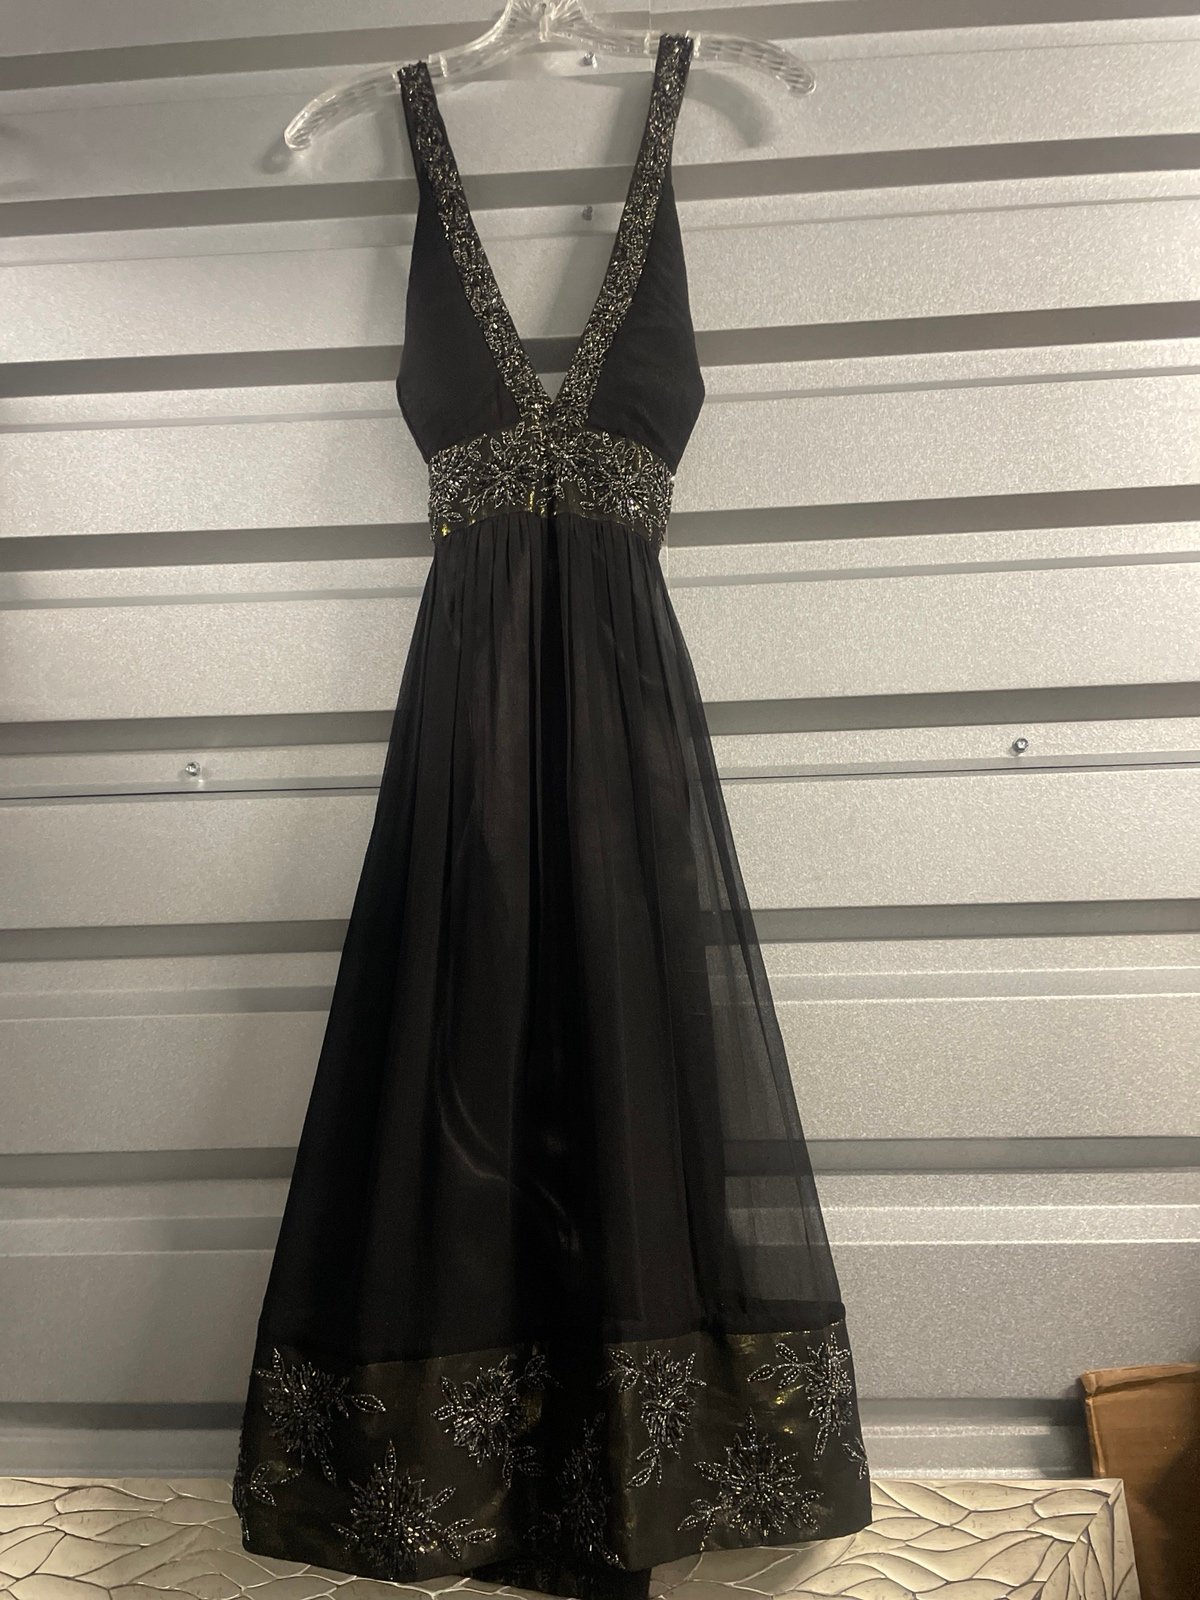 Gorgeous adrianna papell special occasion beaded silk dress size 10 Jrtd3oMKm outlet online shop